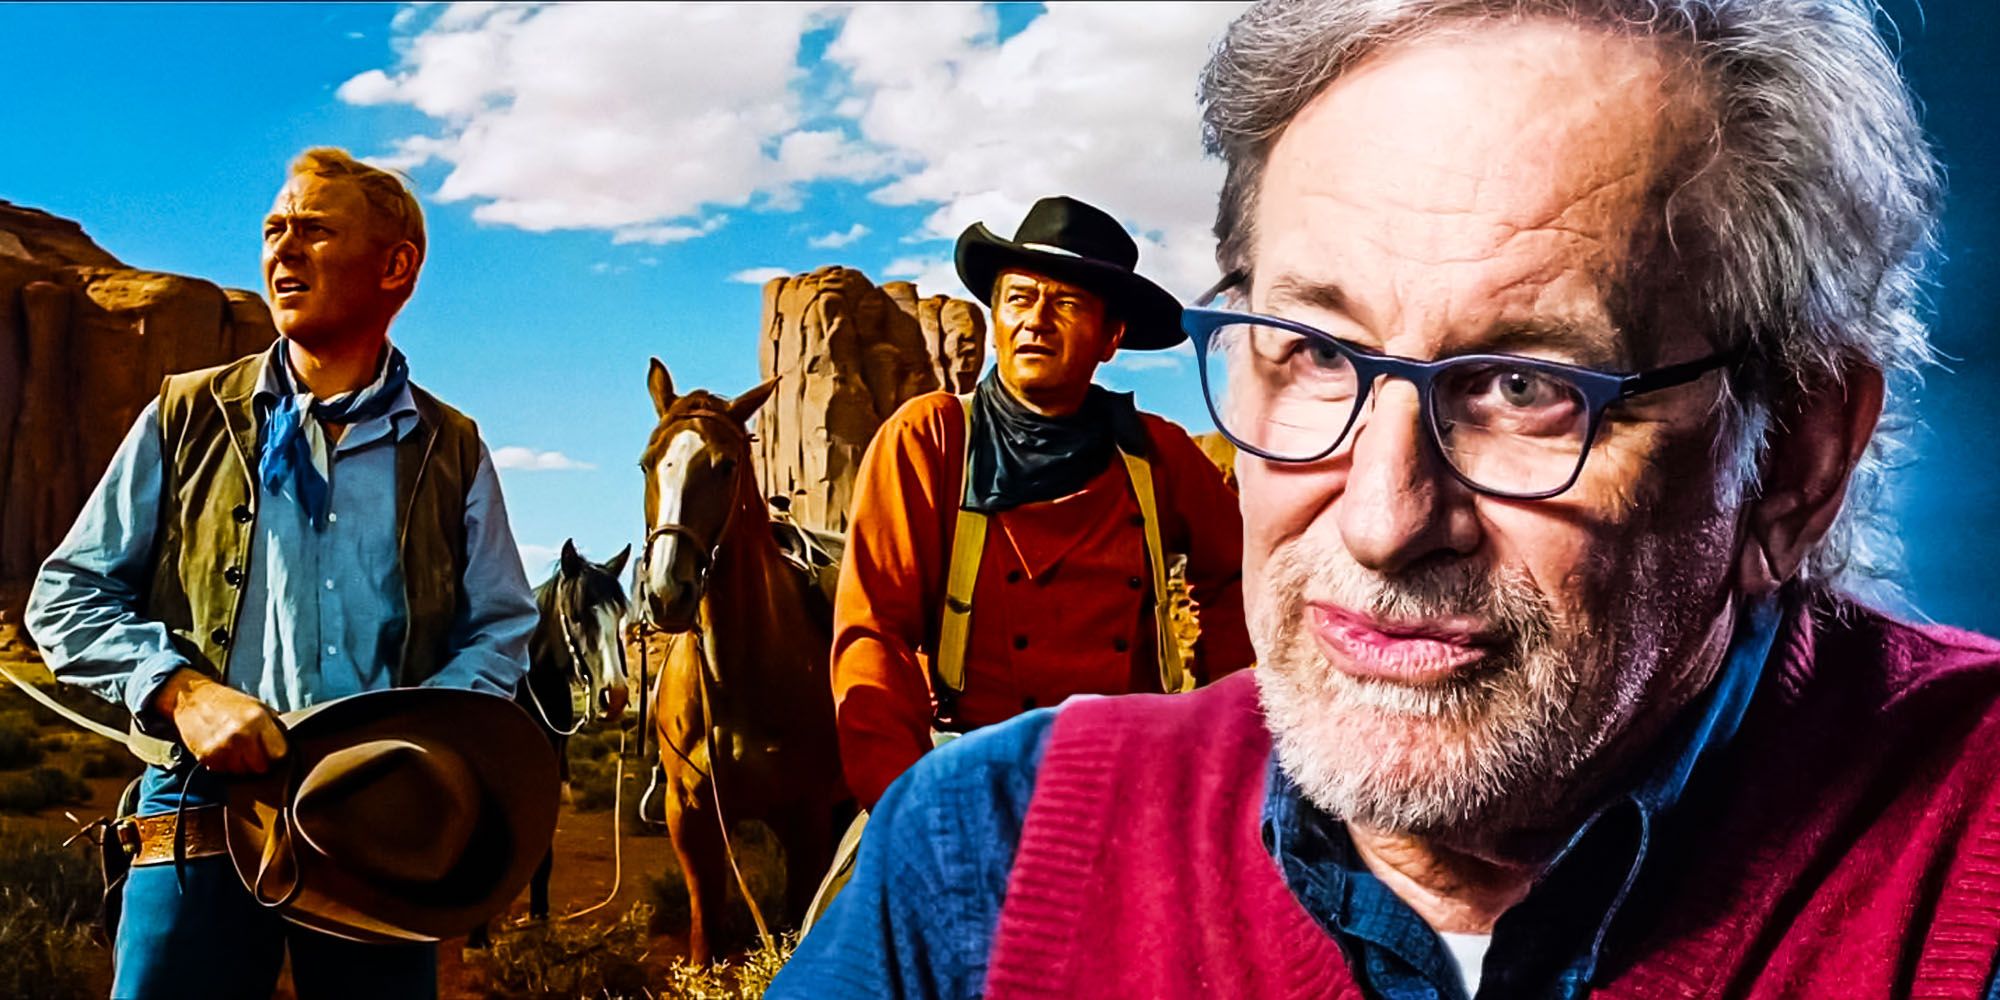 Spielberg Already Revealed The Perfect Western For His Next Movie